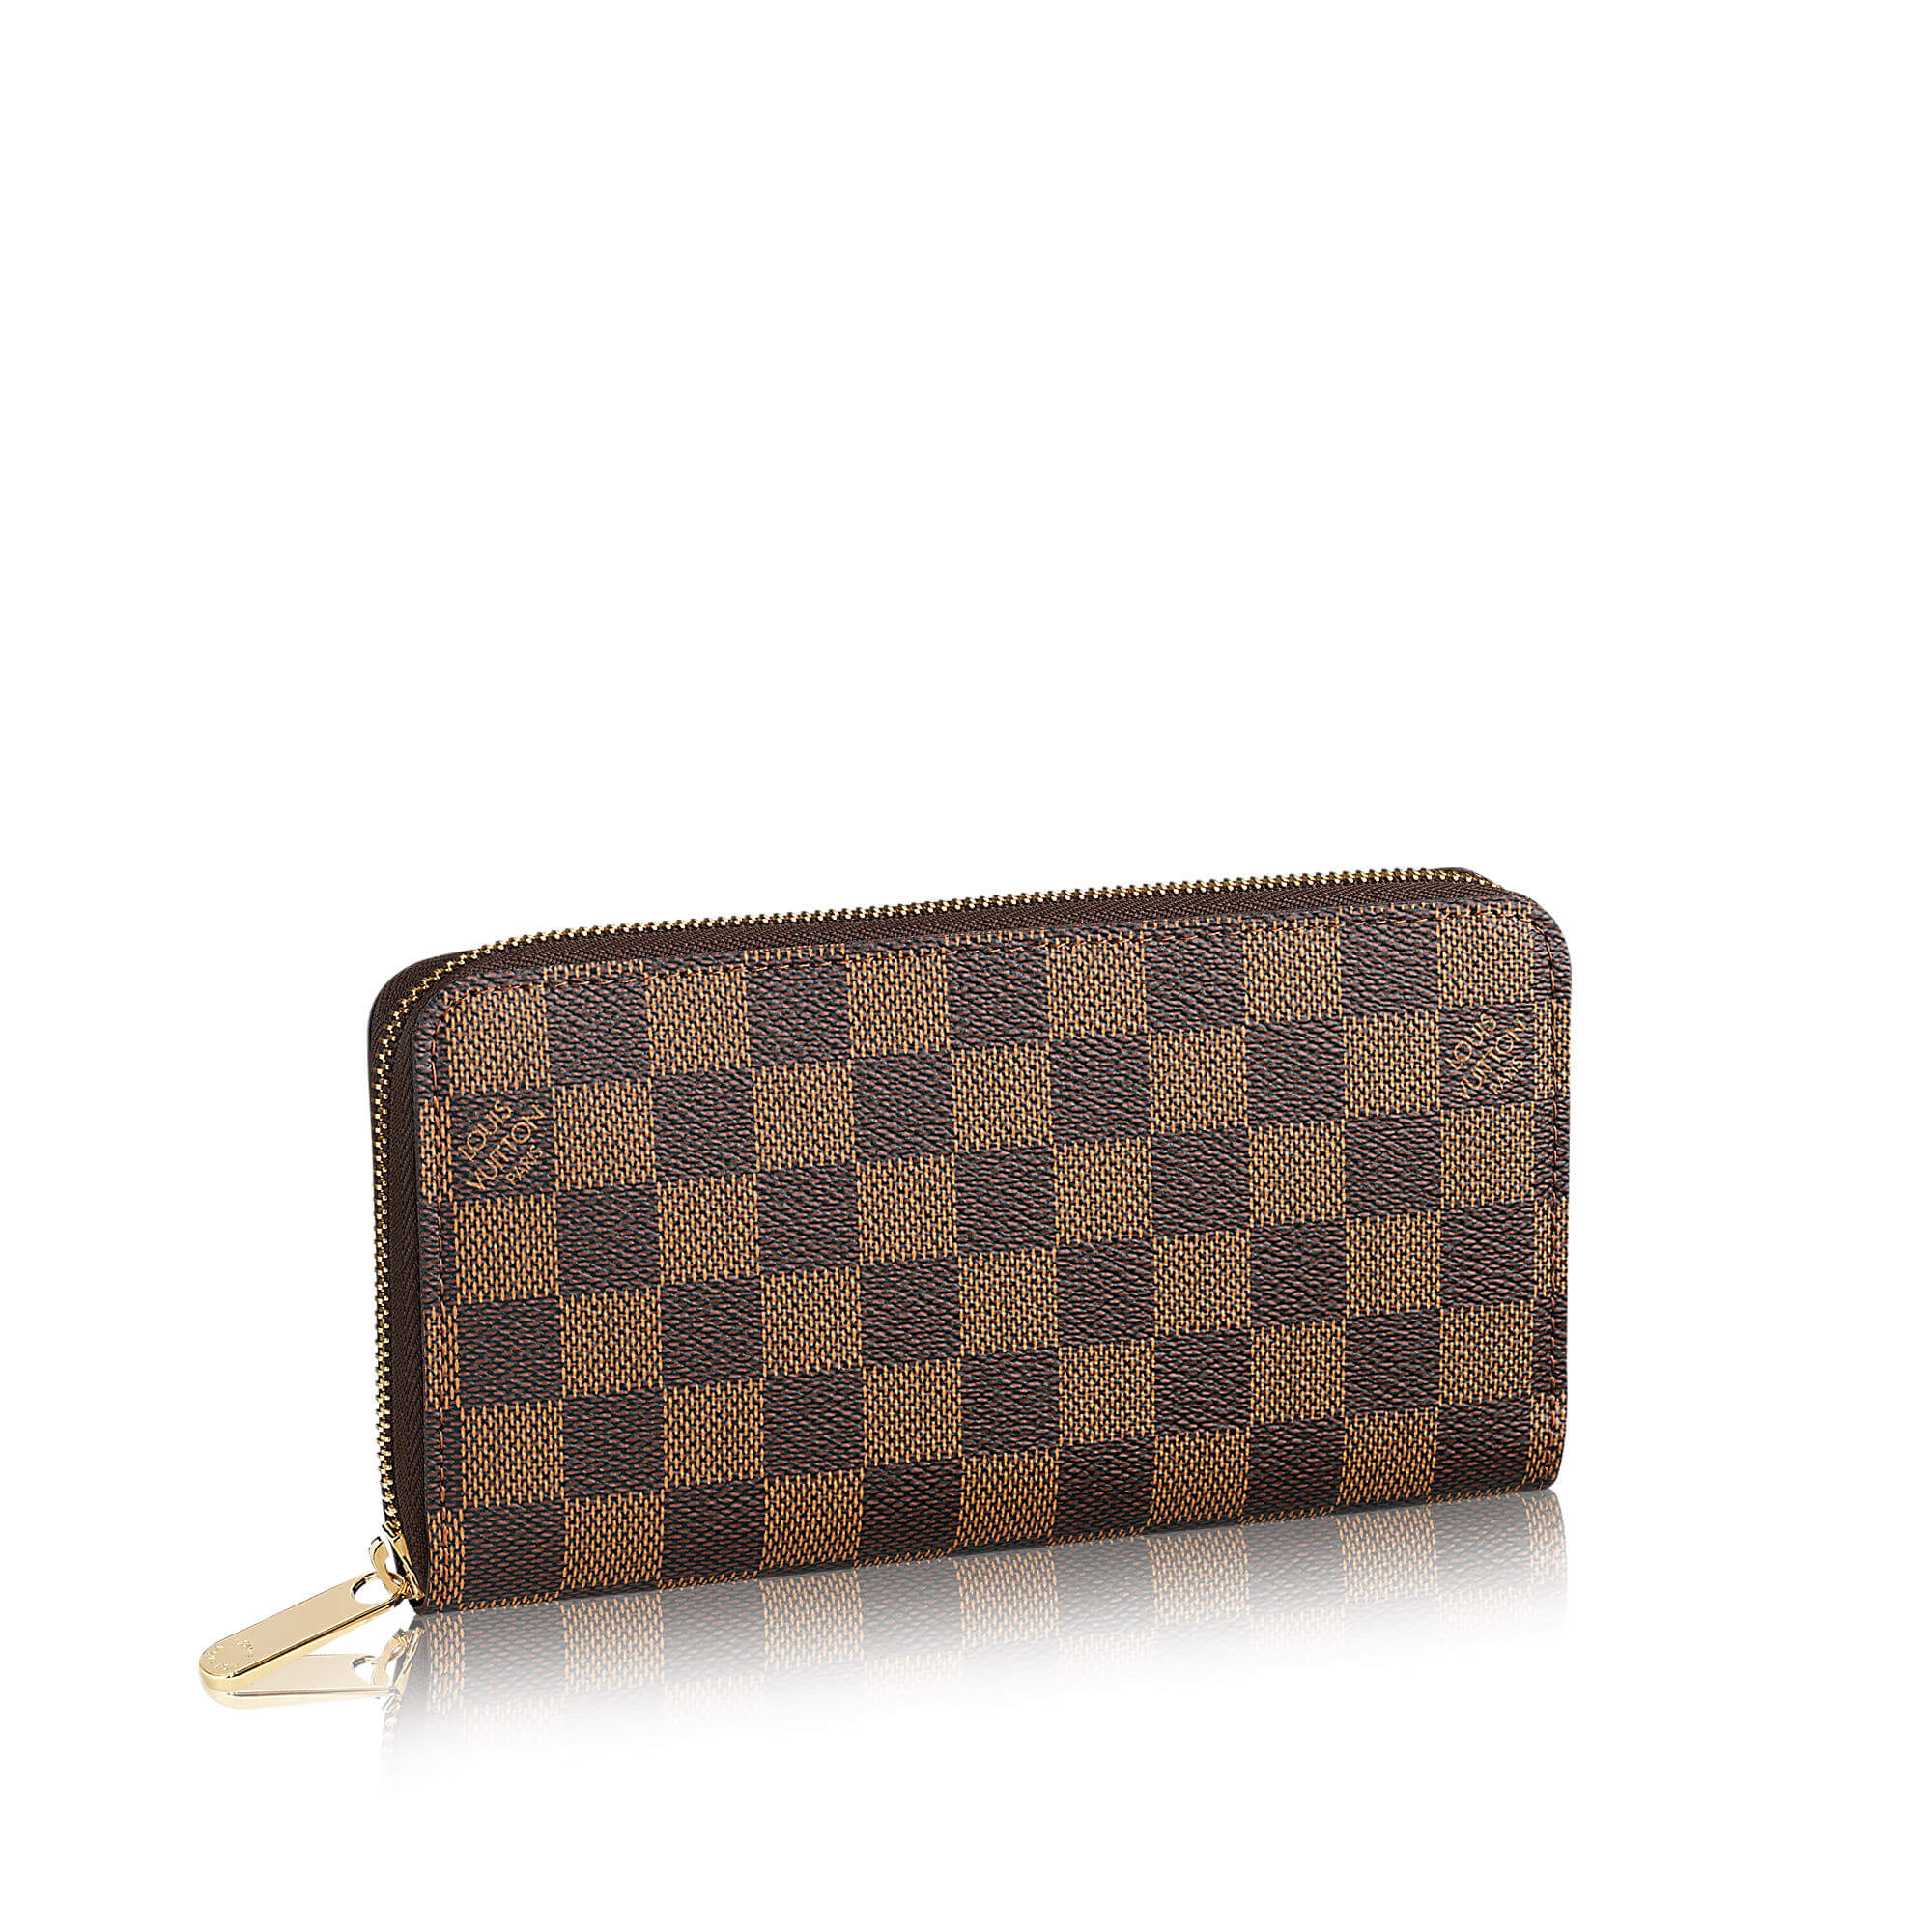 louis-vuitton-zippy-wallet-damier-ebene-canvas-small-leather-goods-n60015_pm2_front-view | Reapp ...